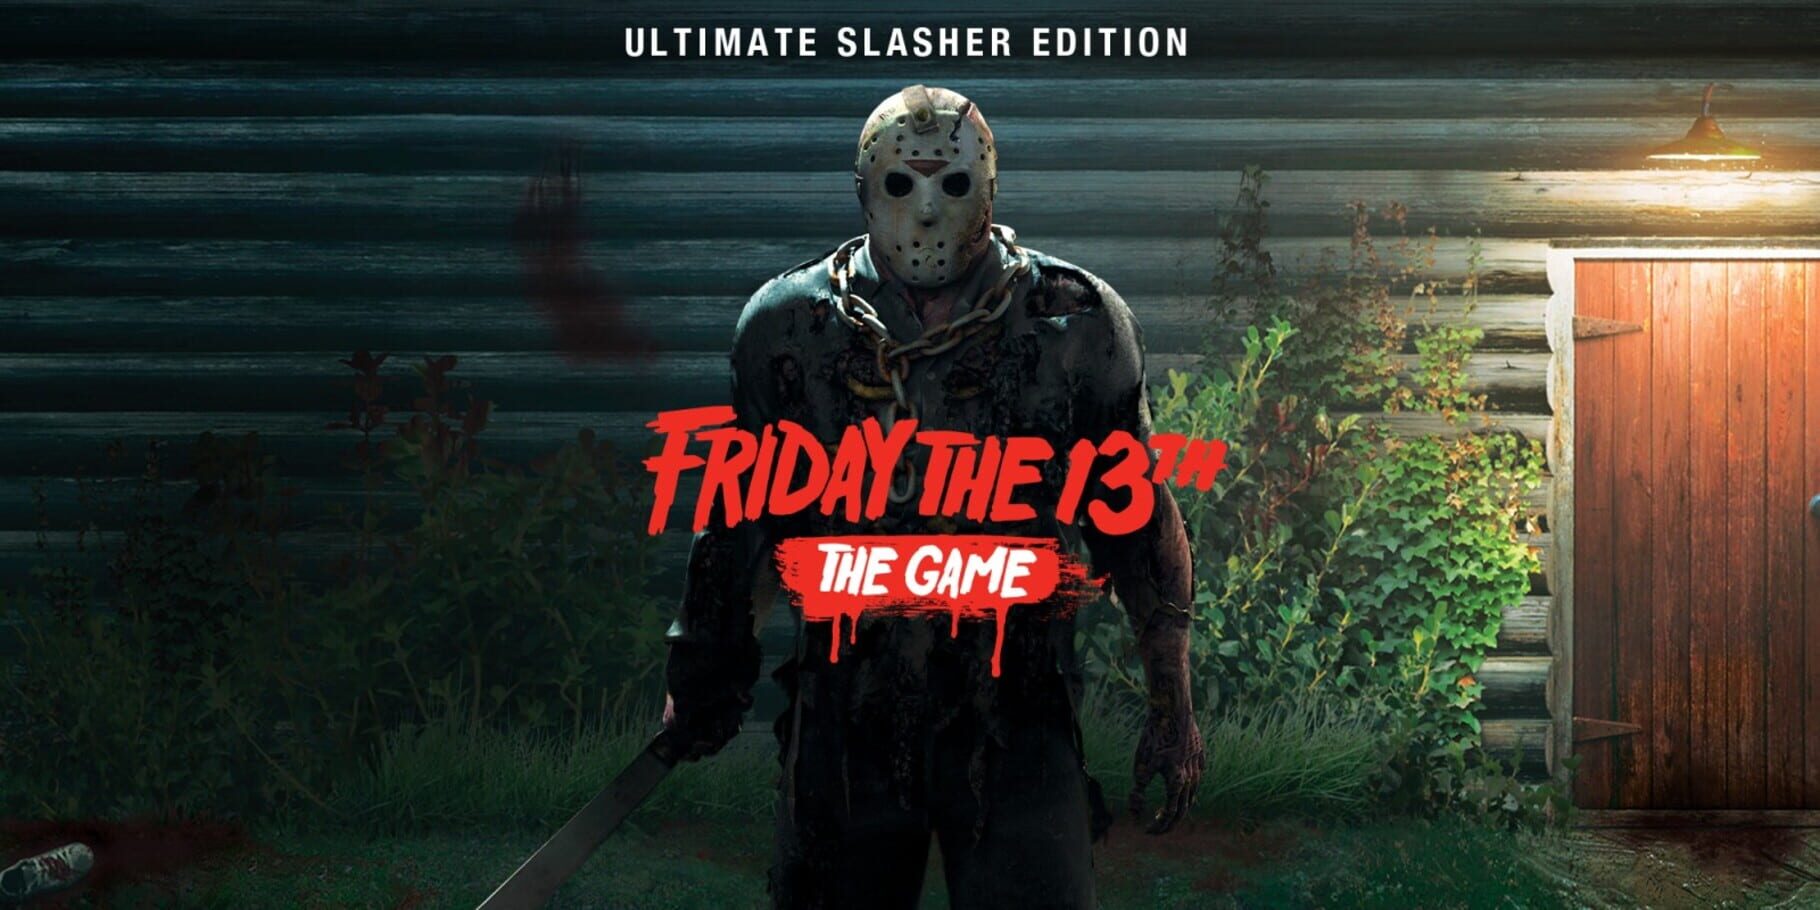 Friday the 13th: The Game - Ultimate Slasher Edition artwork